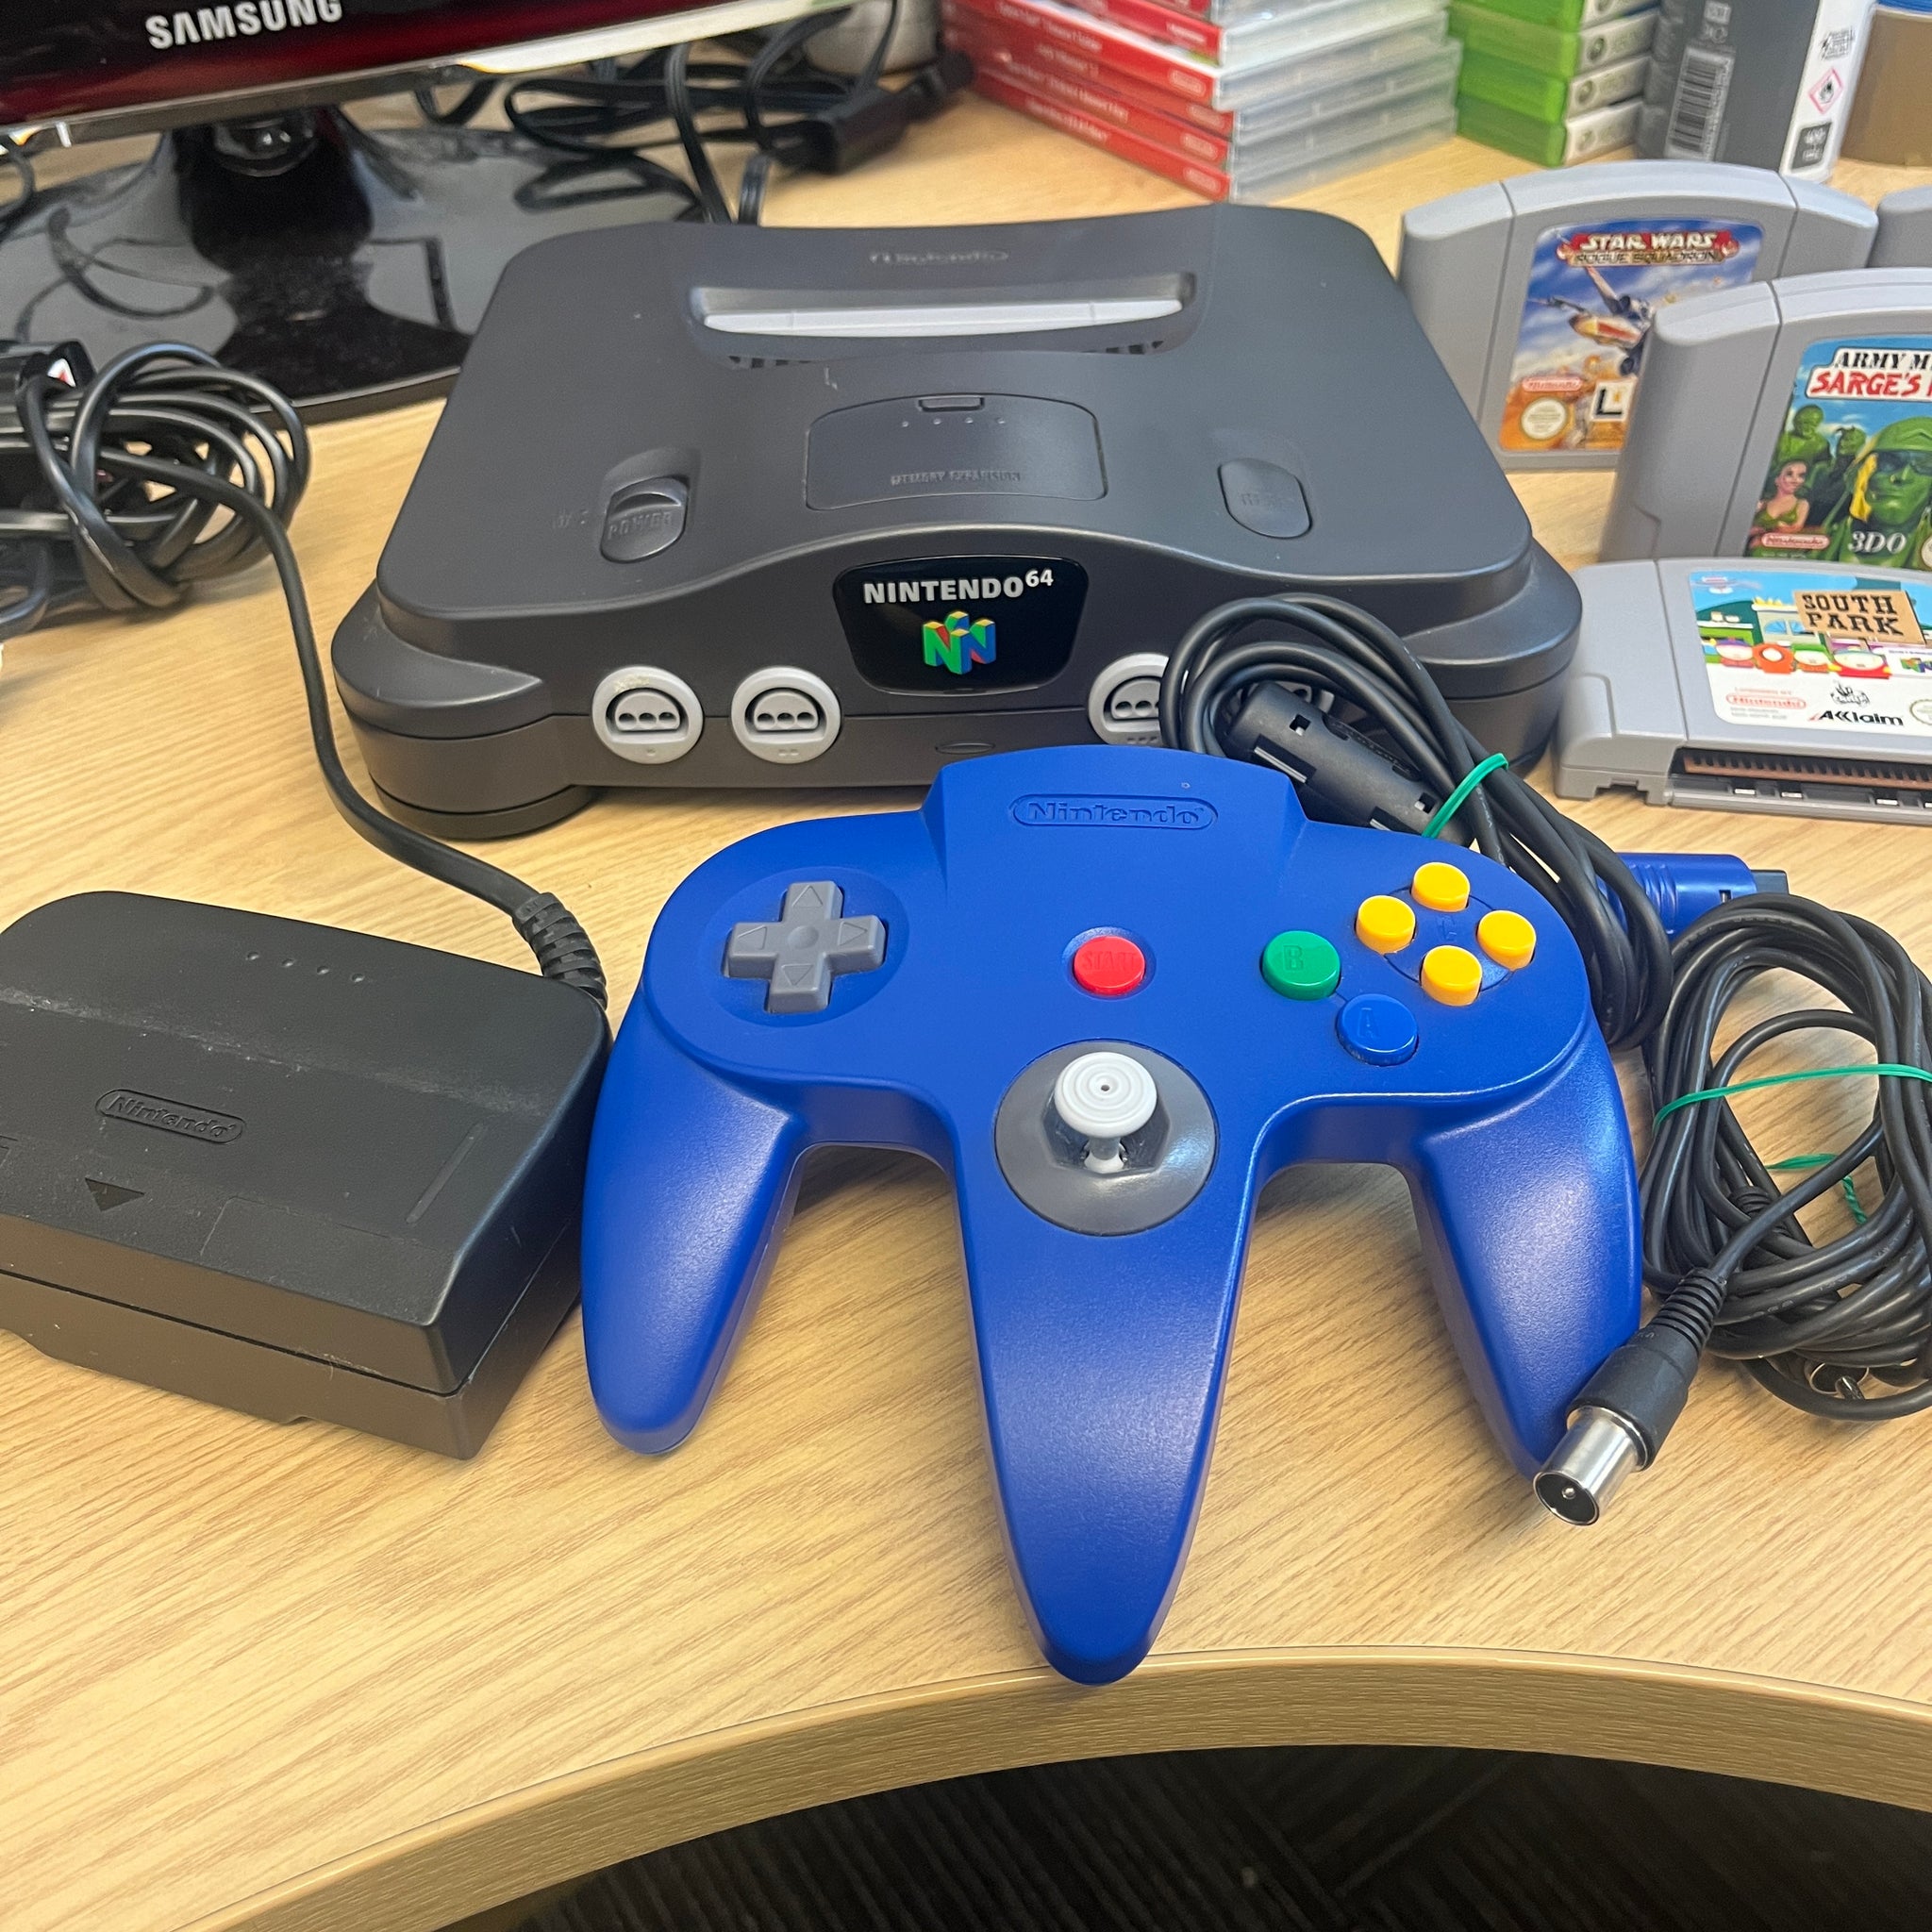 Nintendo 64 console bundle with 7 games